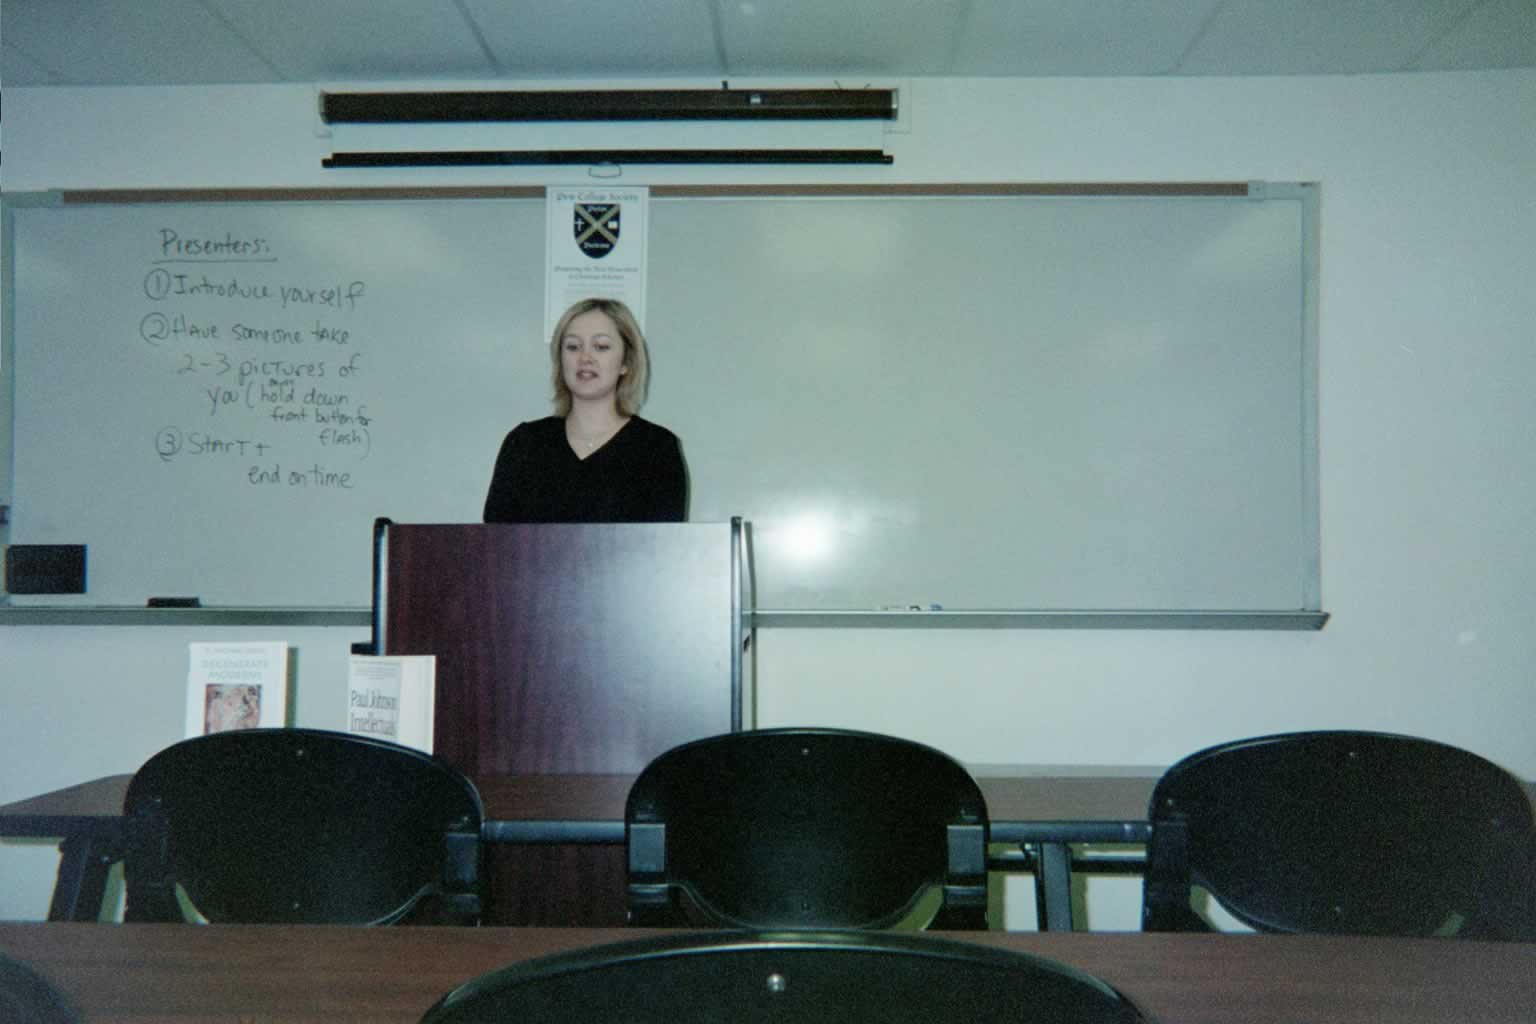 picture of a woman standing behind the podium talking while looking down